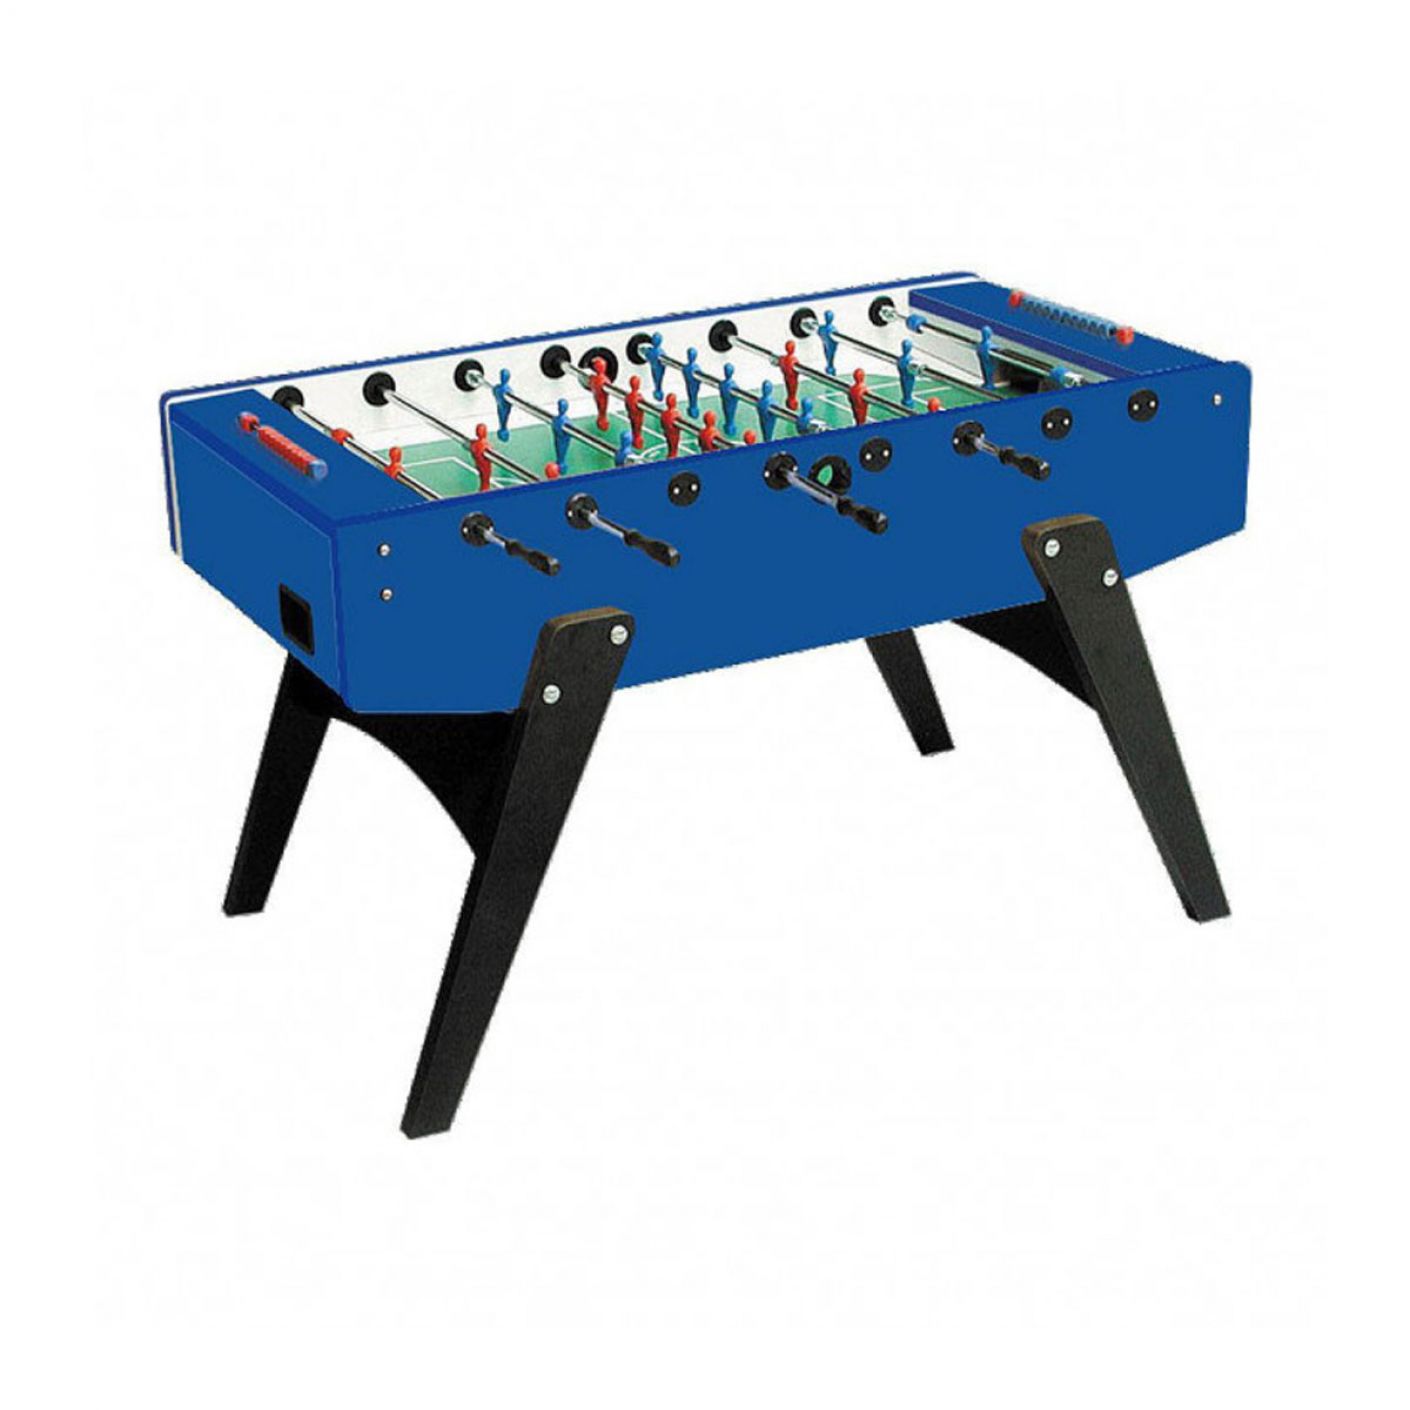 Garlando Football Table G-2000 blue with outgoing temples